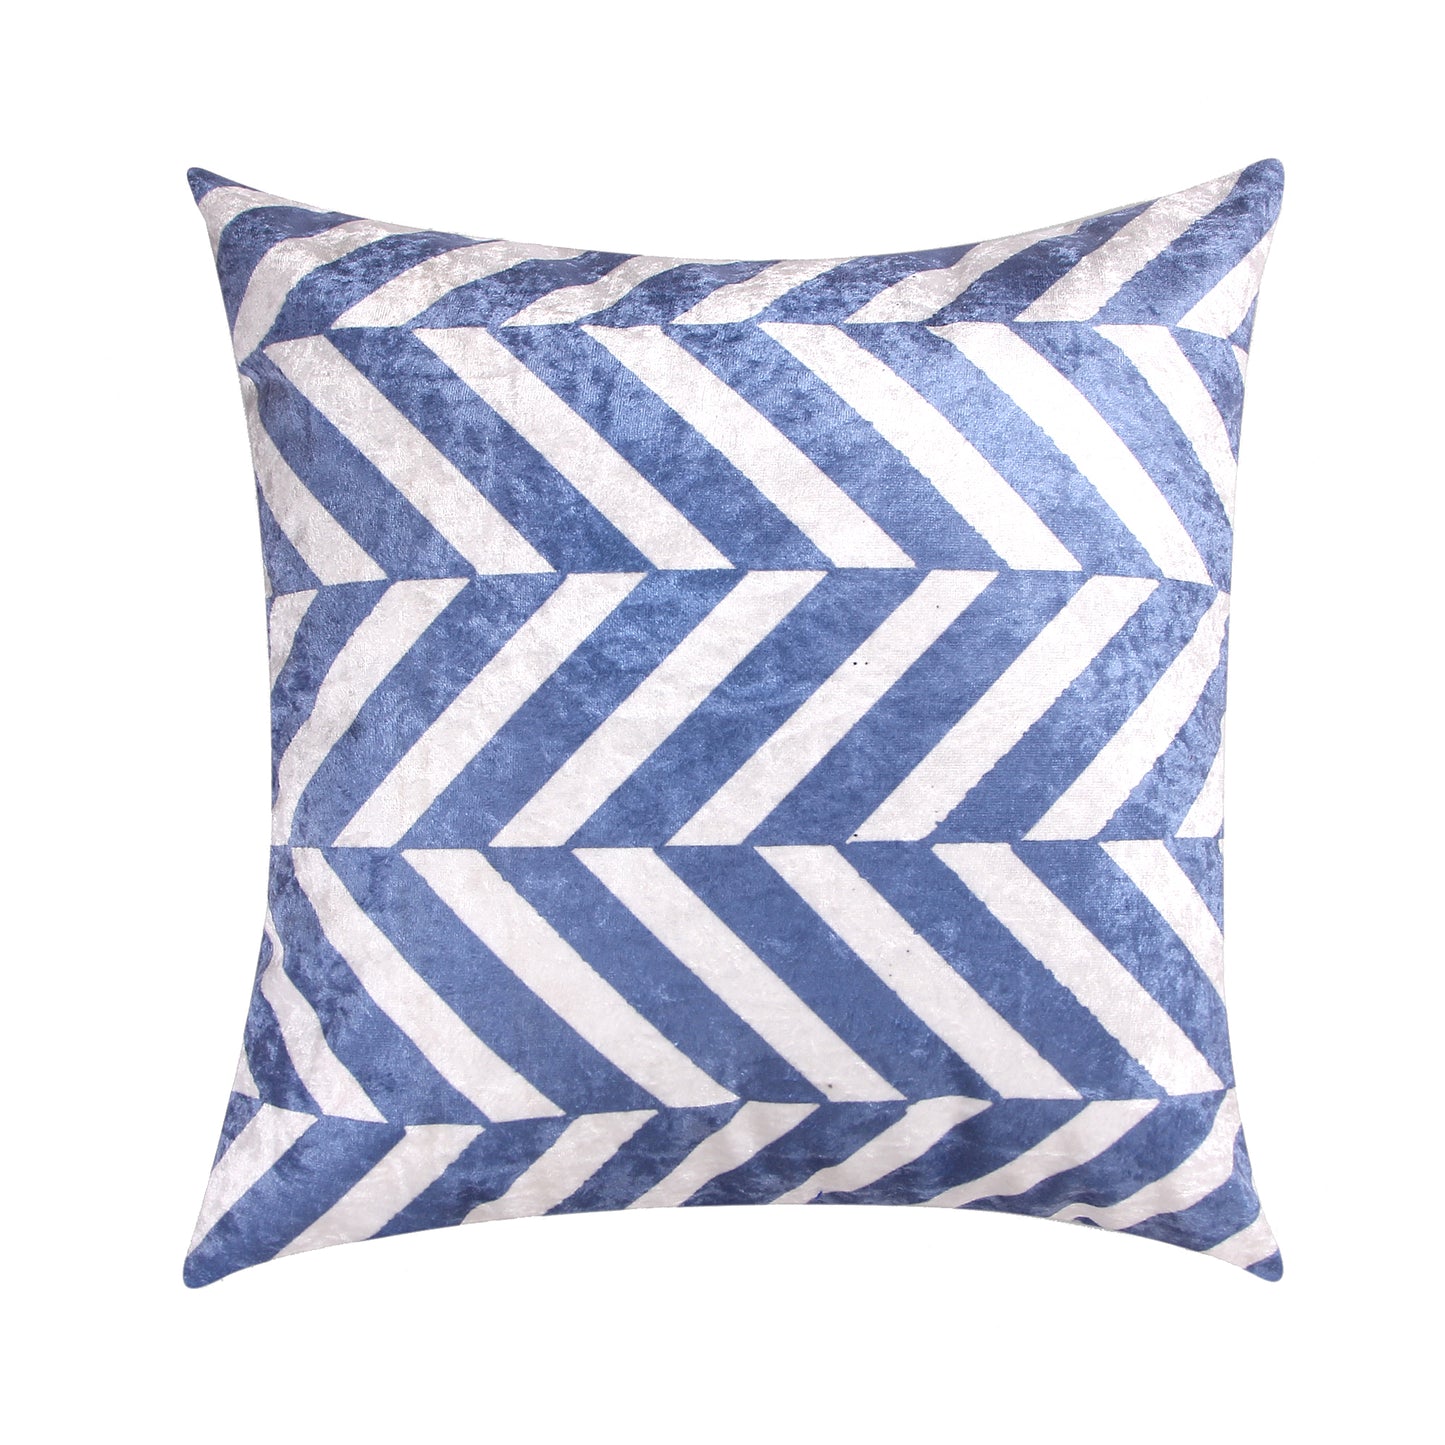 Delft 7 Fabric Cushion Cover Set (Blue and White, 6 -16 x 16 Inch, 1 -18 x12 Inch)